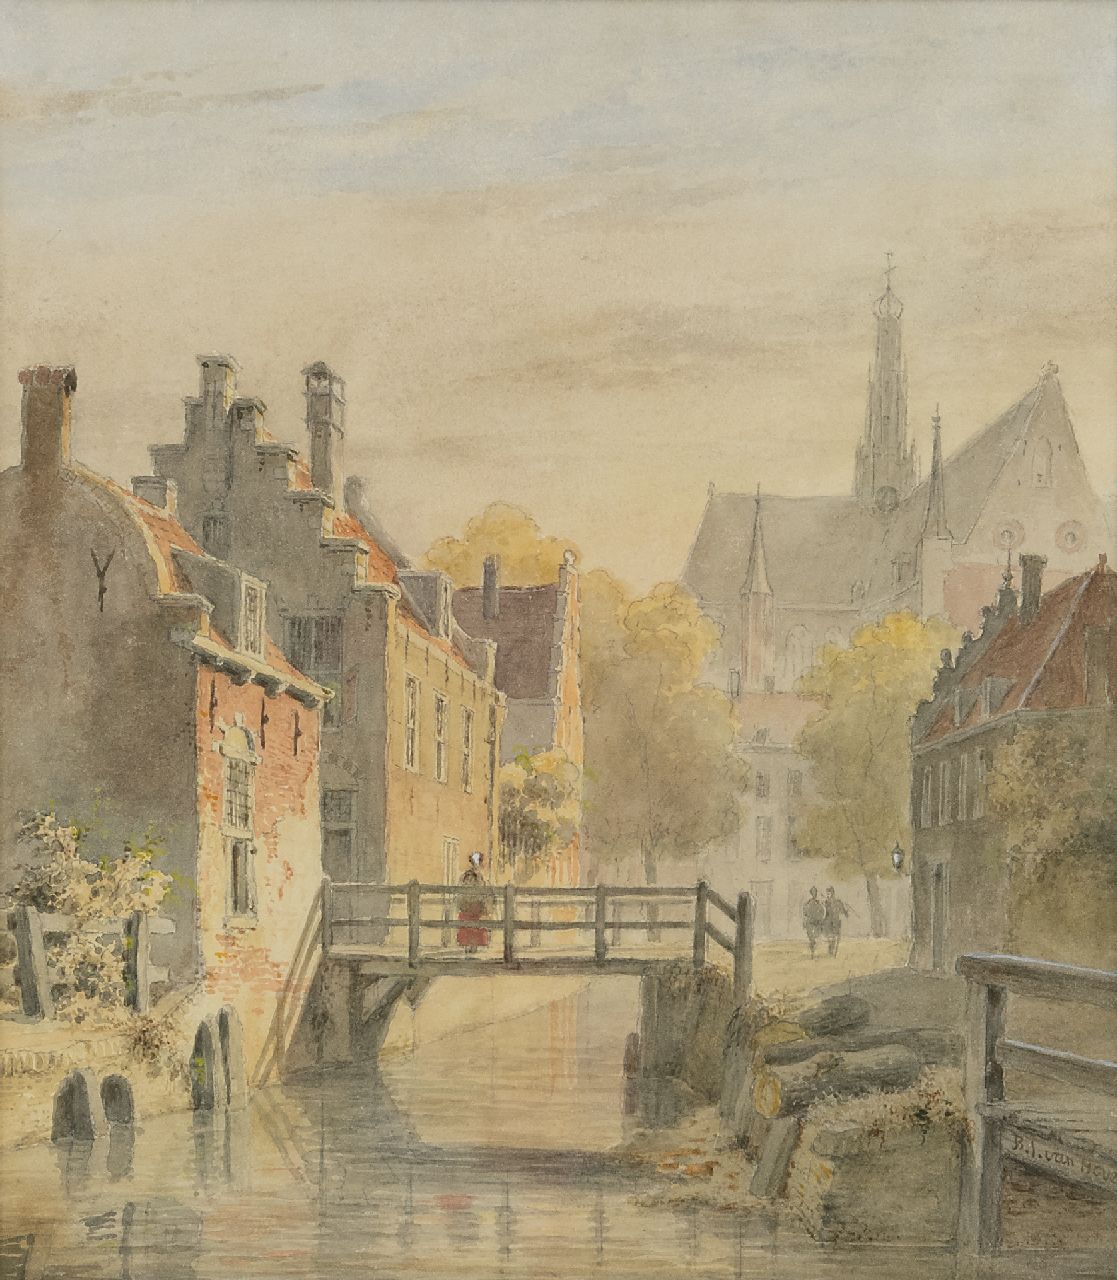 Hove B.J. van | Bartholomeus Johannes 'Bart' van Hove | Watercolours and drawings offered for sale | A tow view k of Haarlem with the Sint-Bavoker, watercolour on paper 27.5 x 24.5 cm, signed l.r.